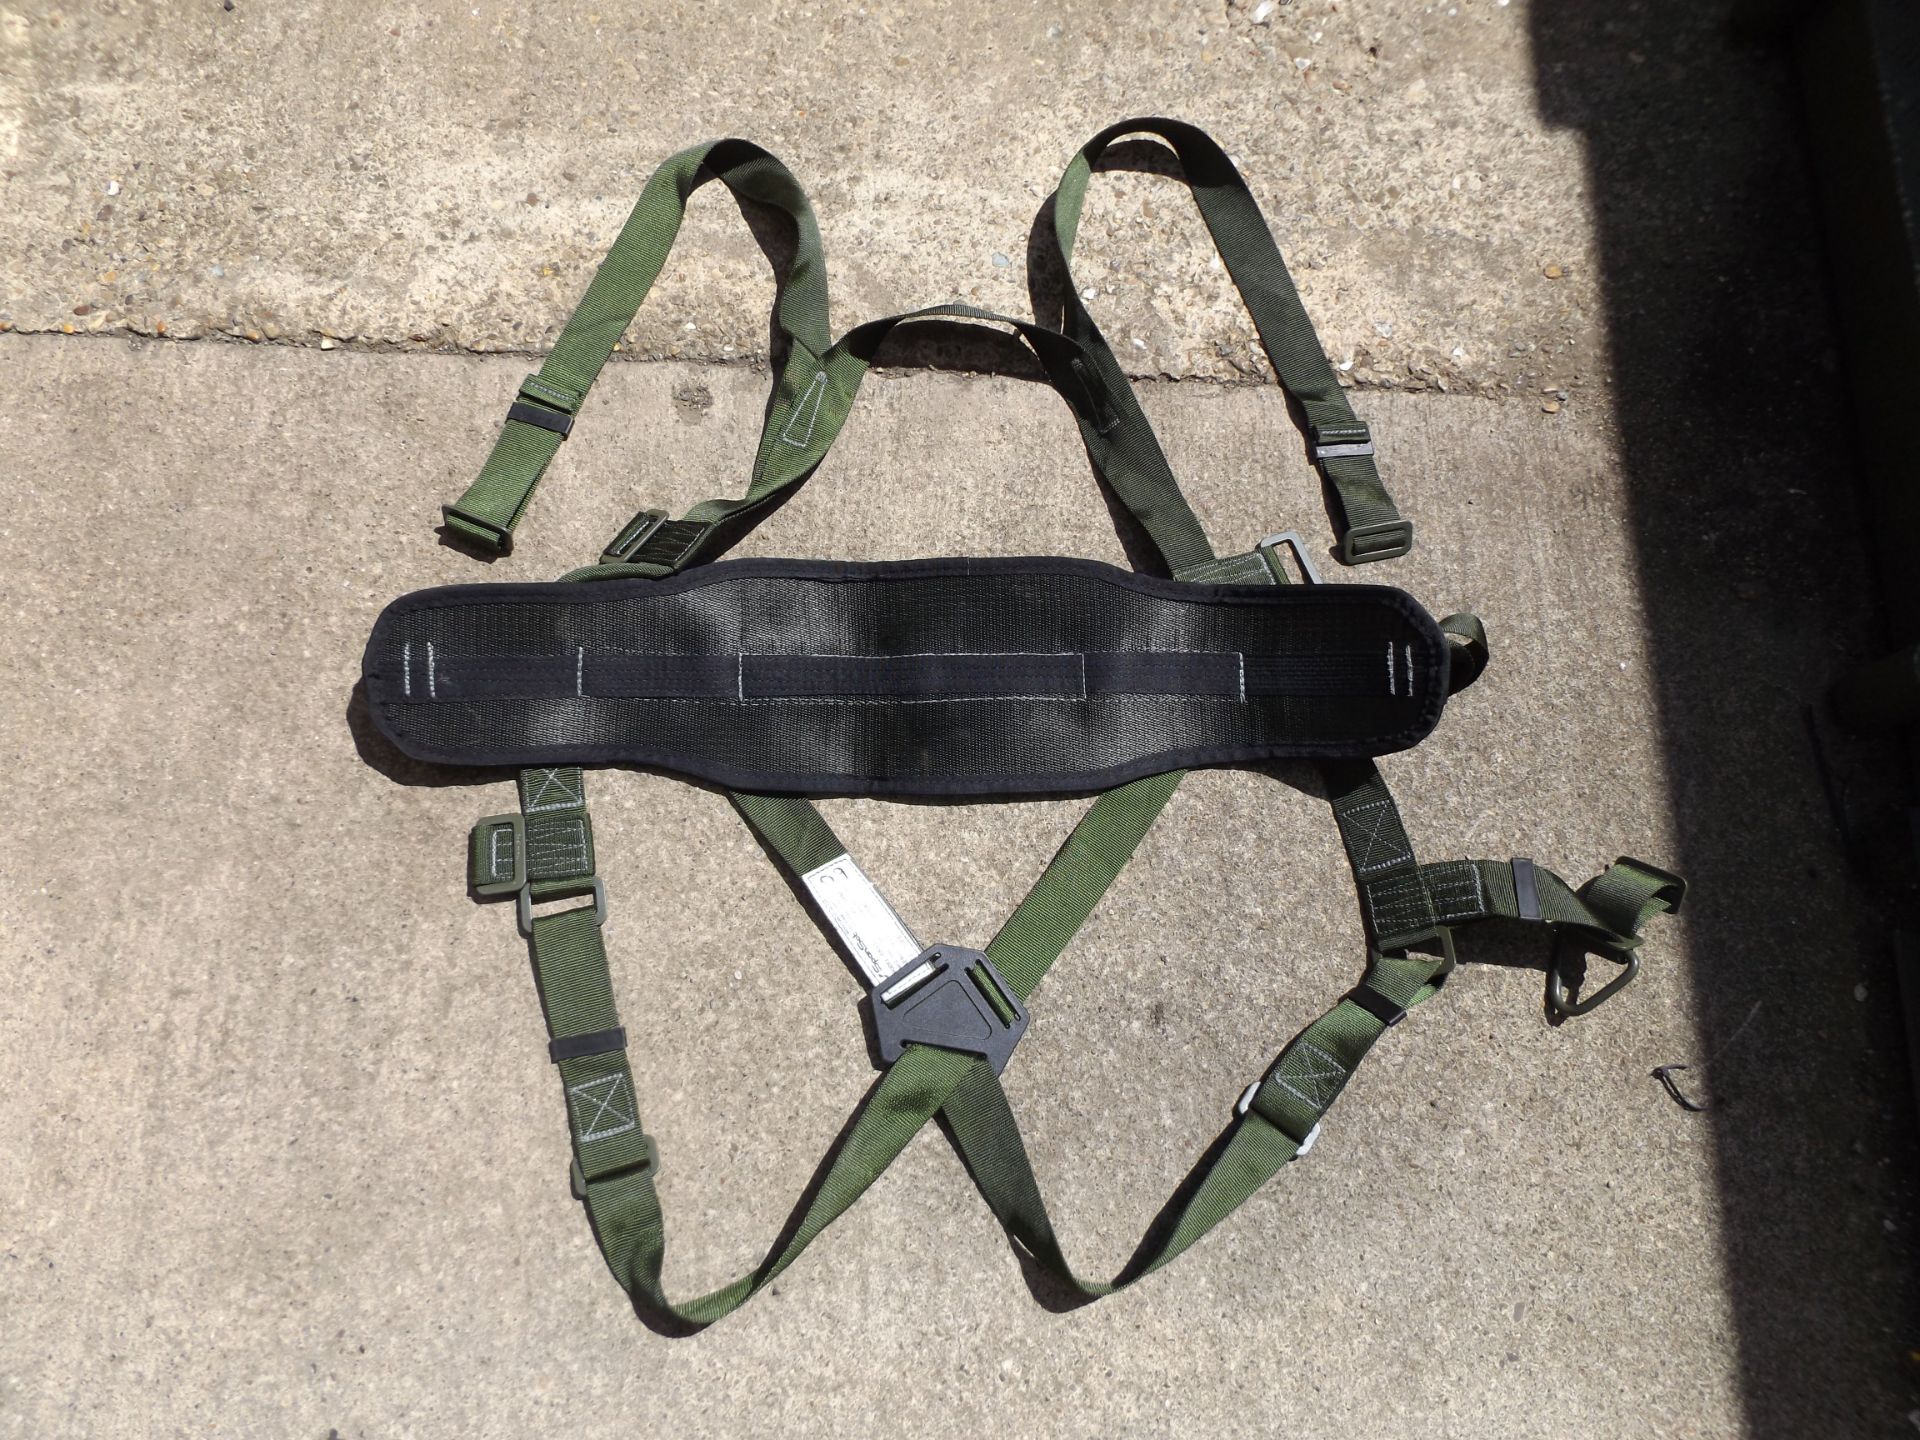 Spanset Full Body Harness with Work Position Lanyards - Image 3 of 10